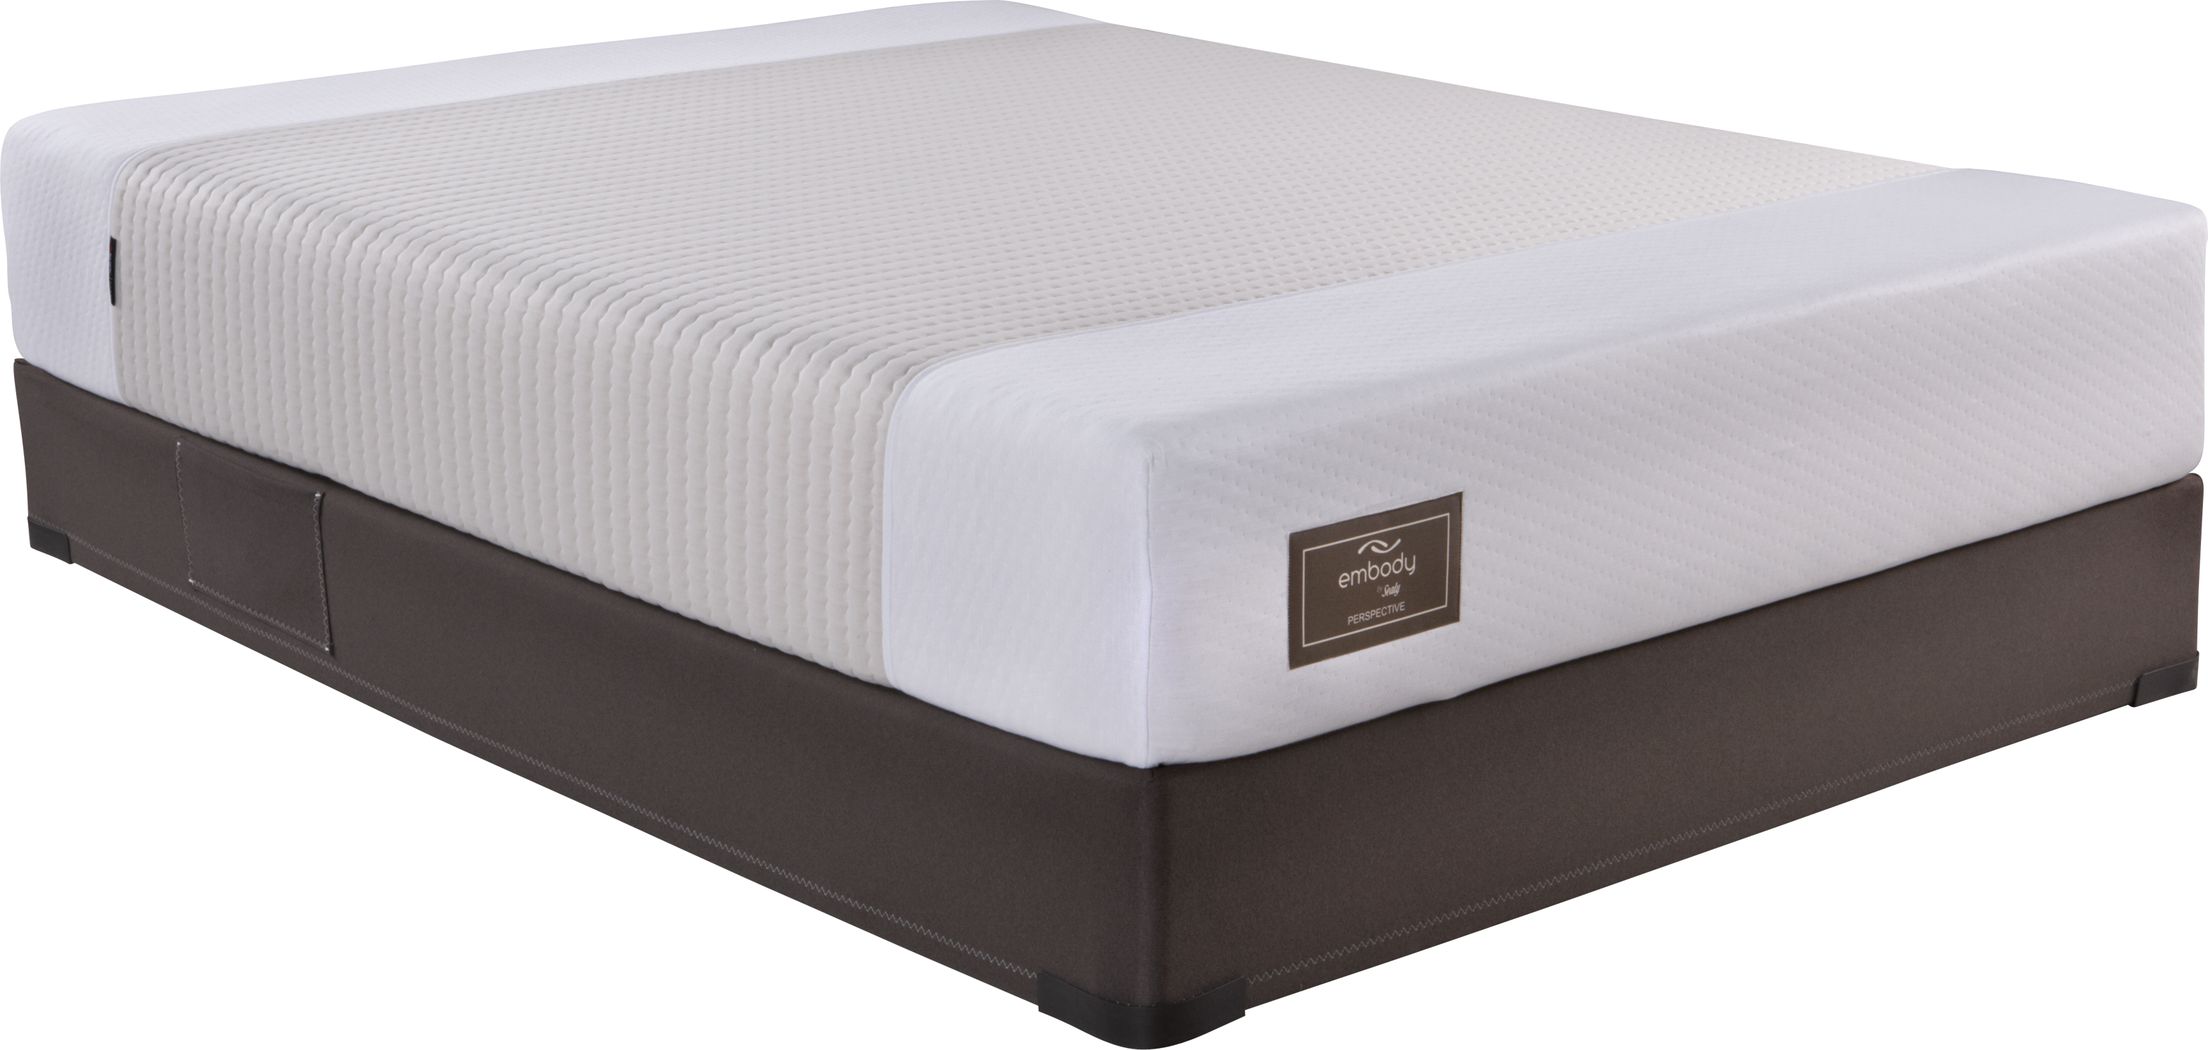 sealy embody iii king mattress review